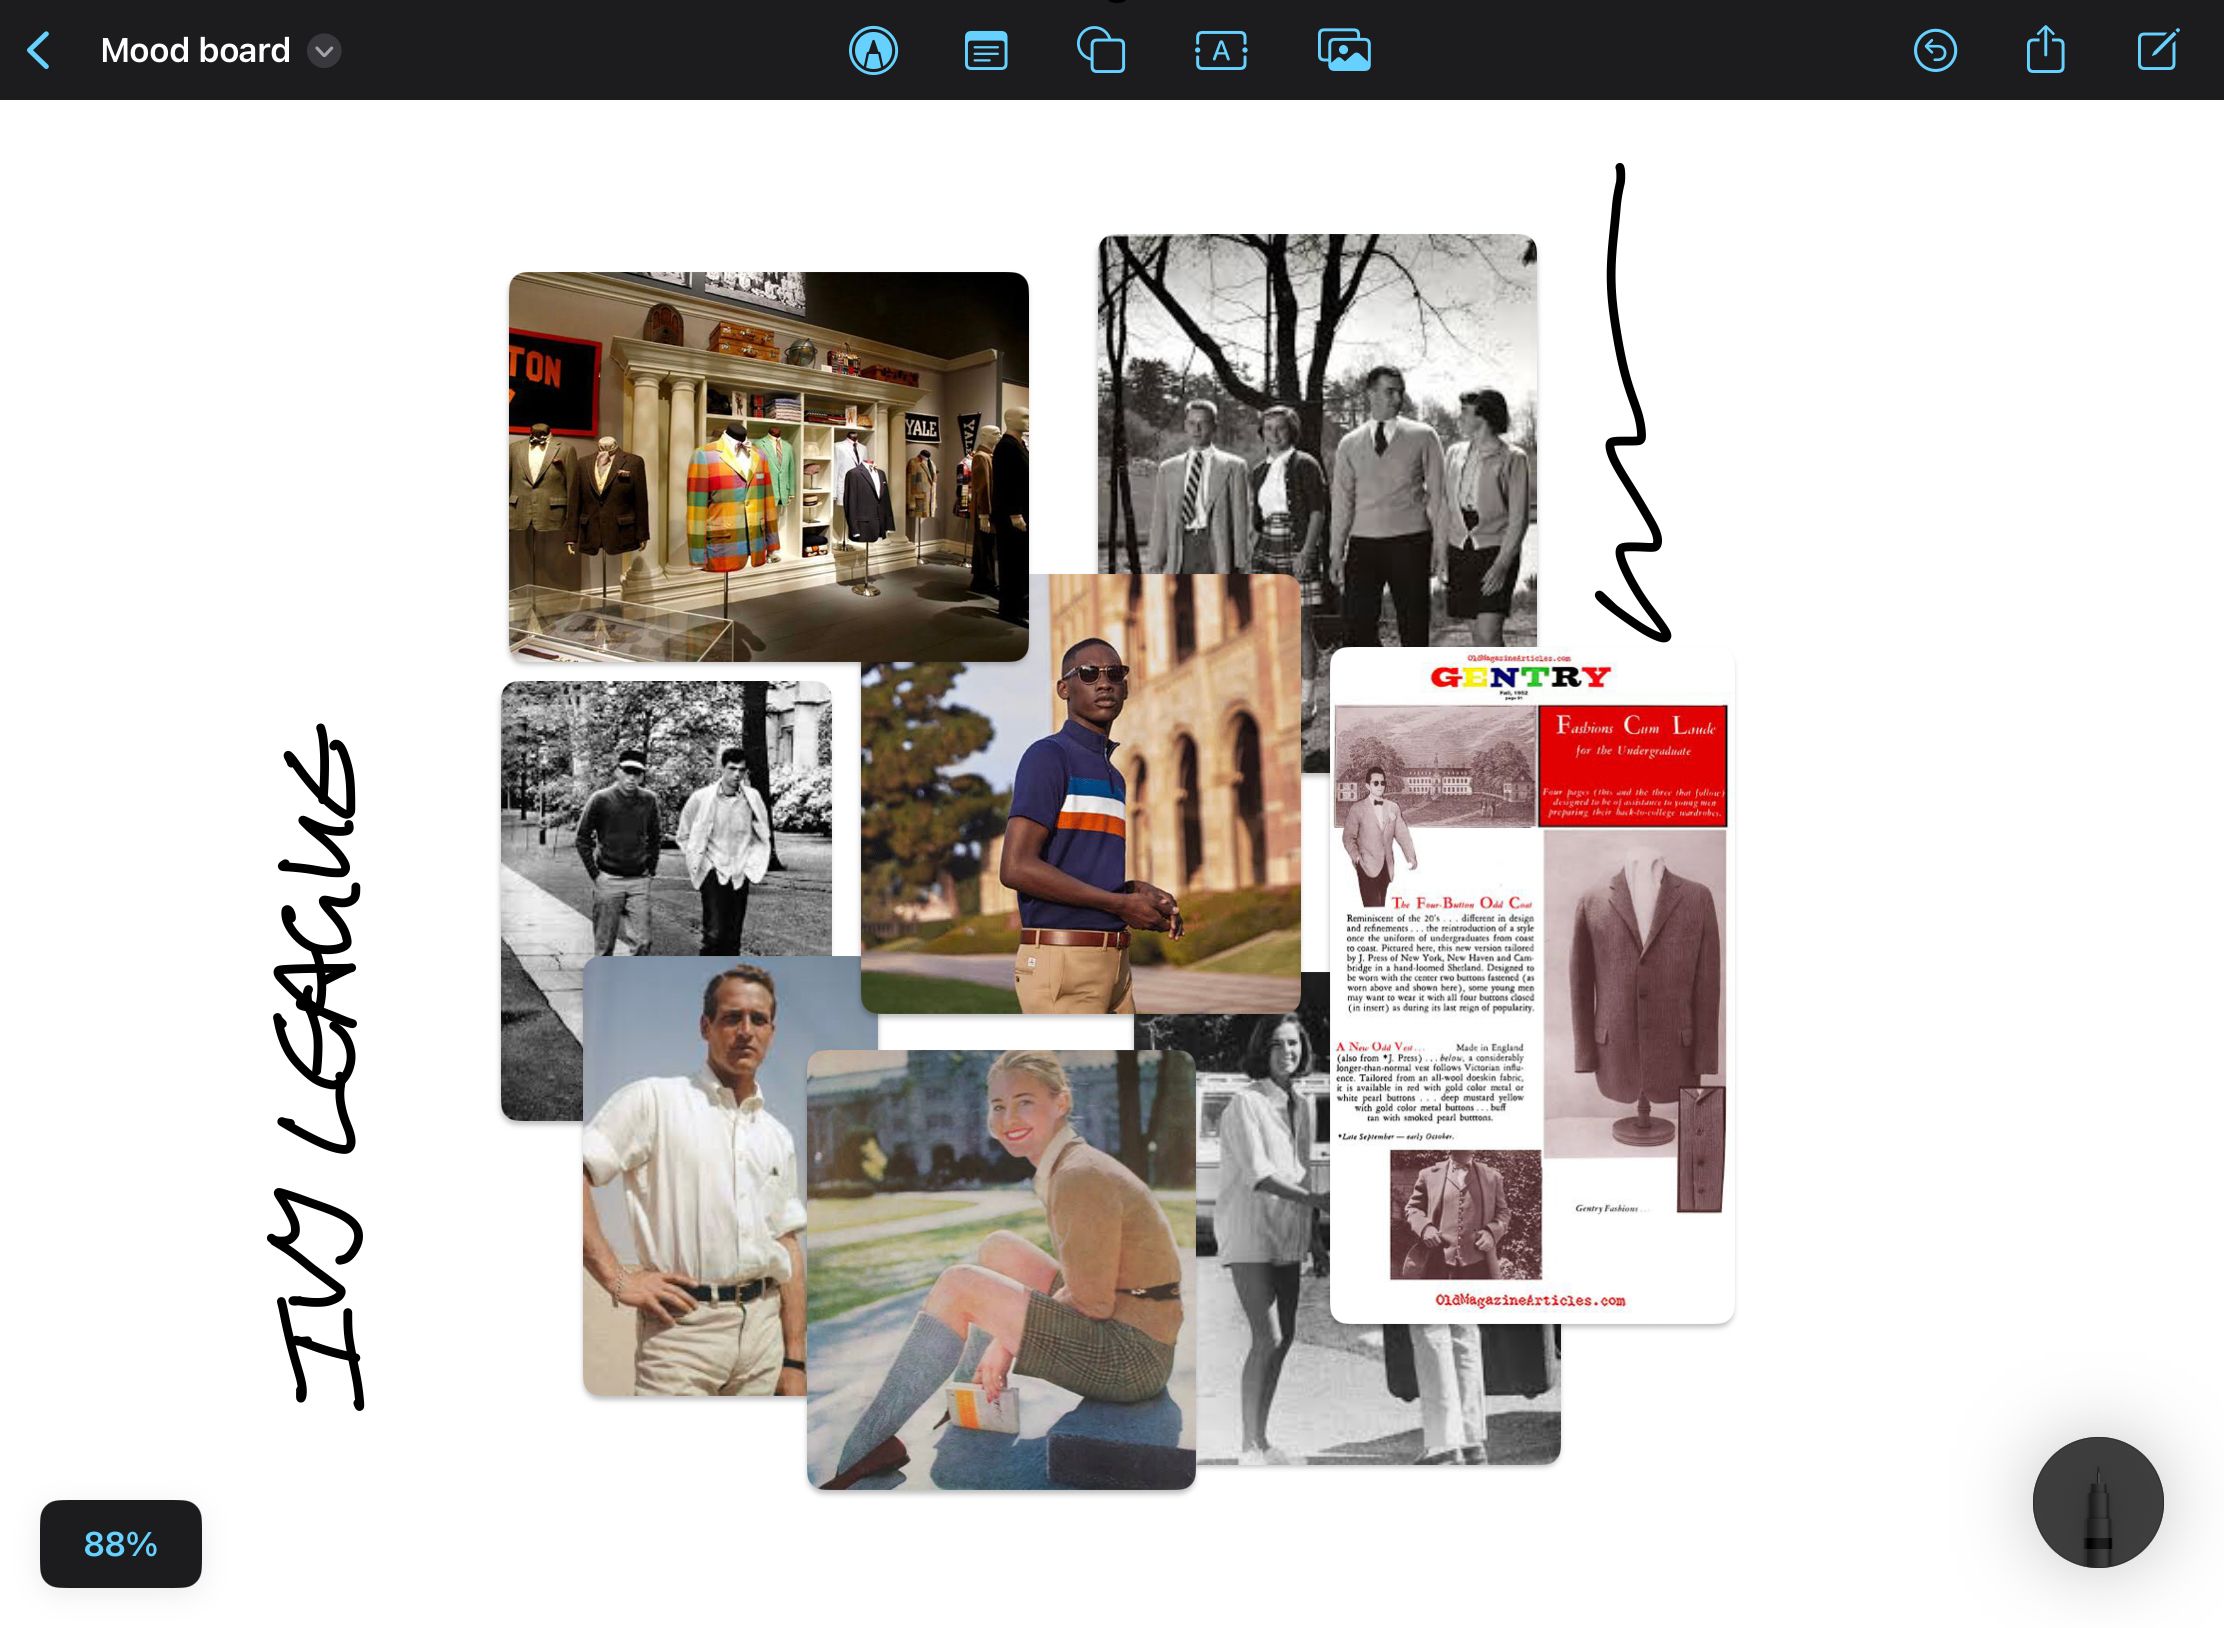 A mood board featuring images of Ivy League fashion created using the Freeform app